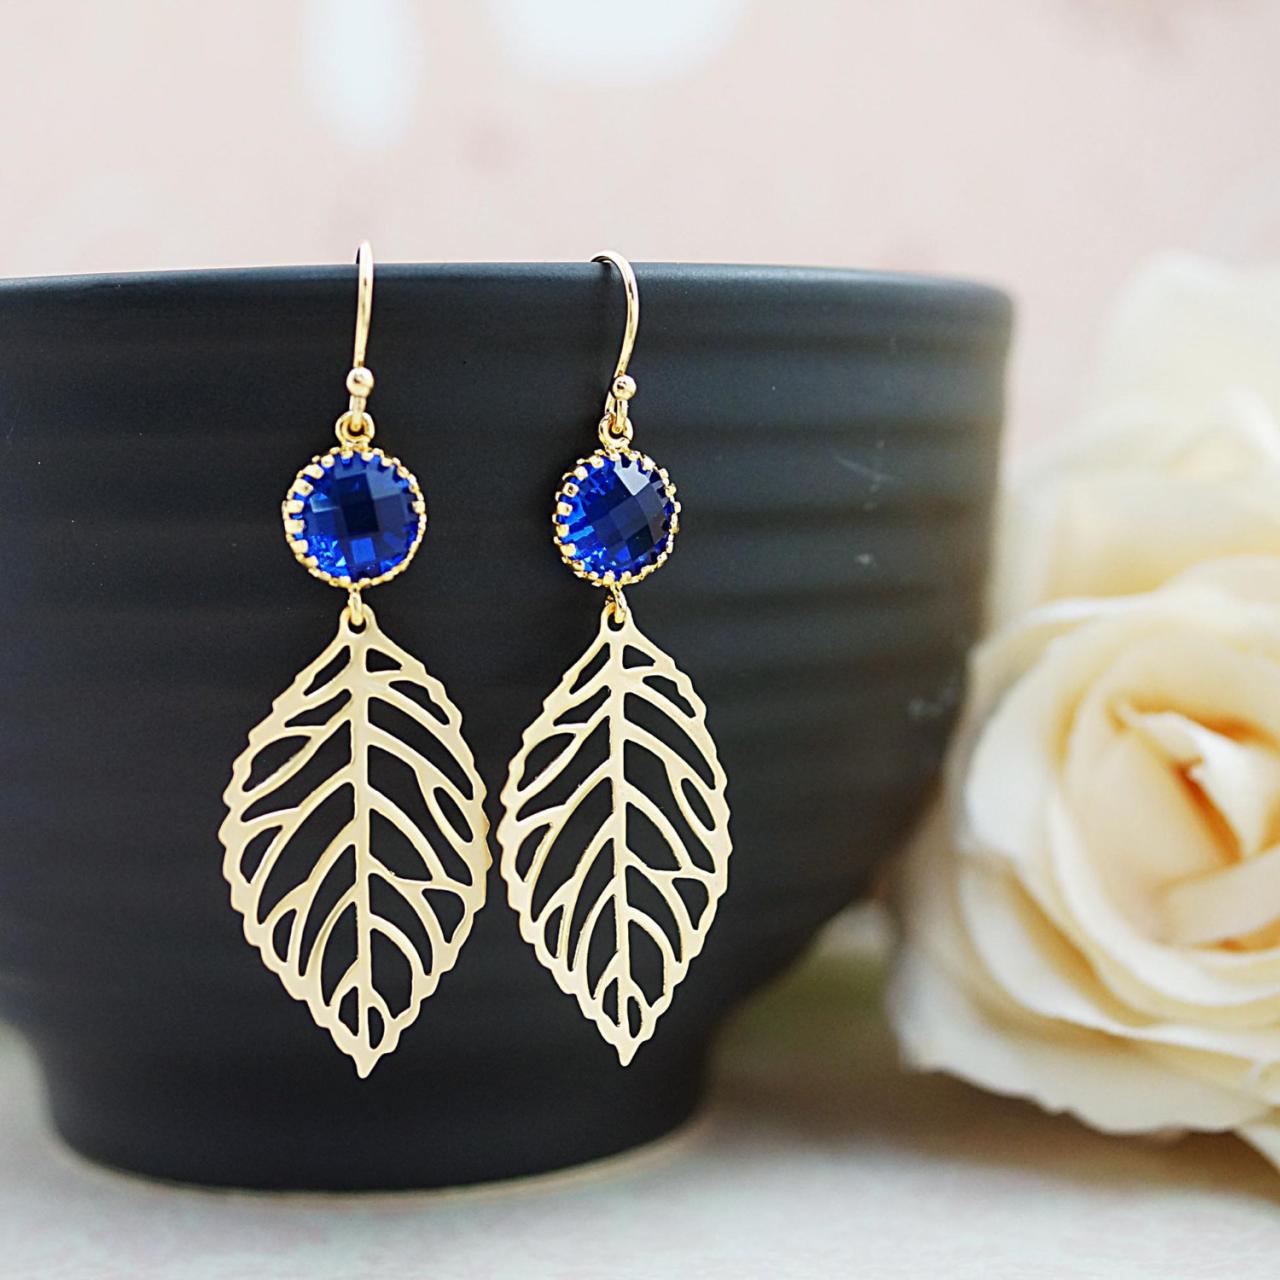 Wedding Jewelry Bridesmaid Gift Bridesmaid Earrings Bridesmaid Jewelry Dangle Earrings Leaf Charm And Sapphire Blue Connector Drop Earrings